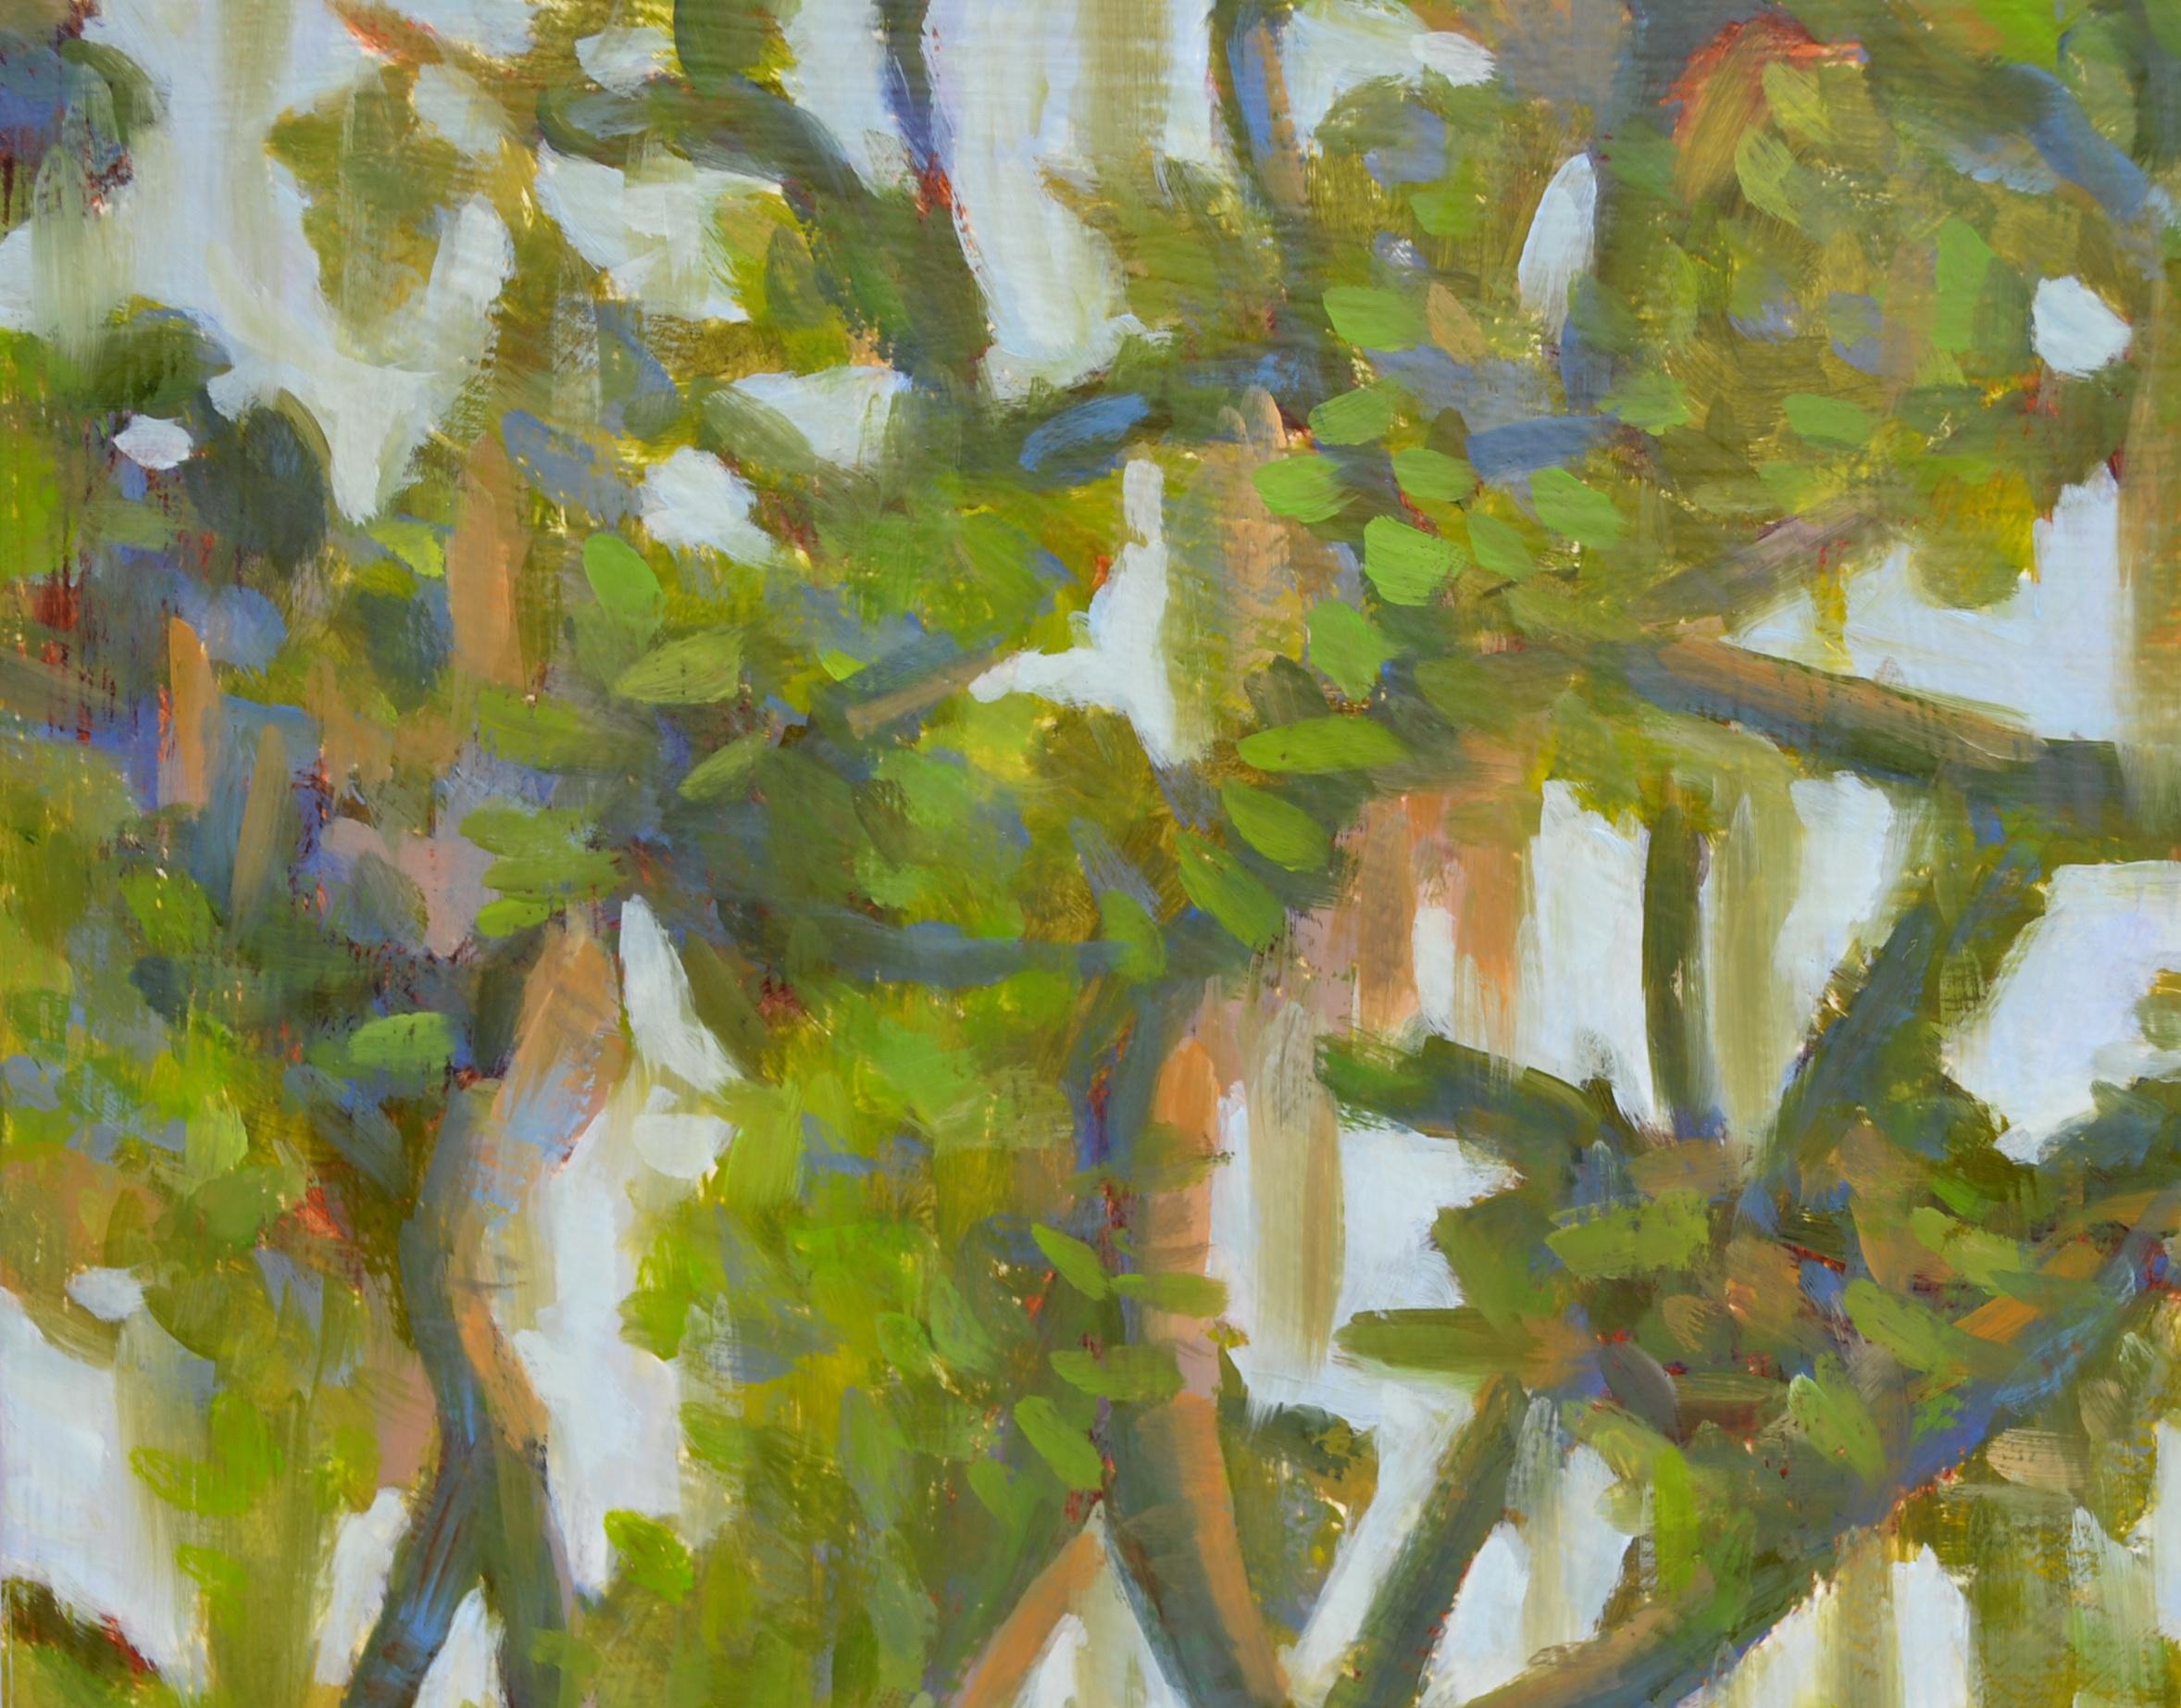 <p>Artist Comments<br />A profusion of greens and rust, artist Fernando Soler was inspired by Florida's natural landscape. Blues are flecked into the shadows reflecting the expansive soft blue sky. 